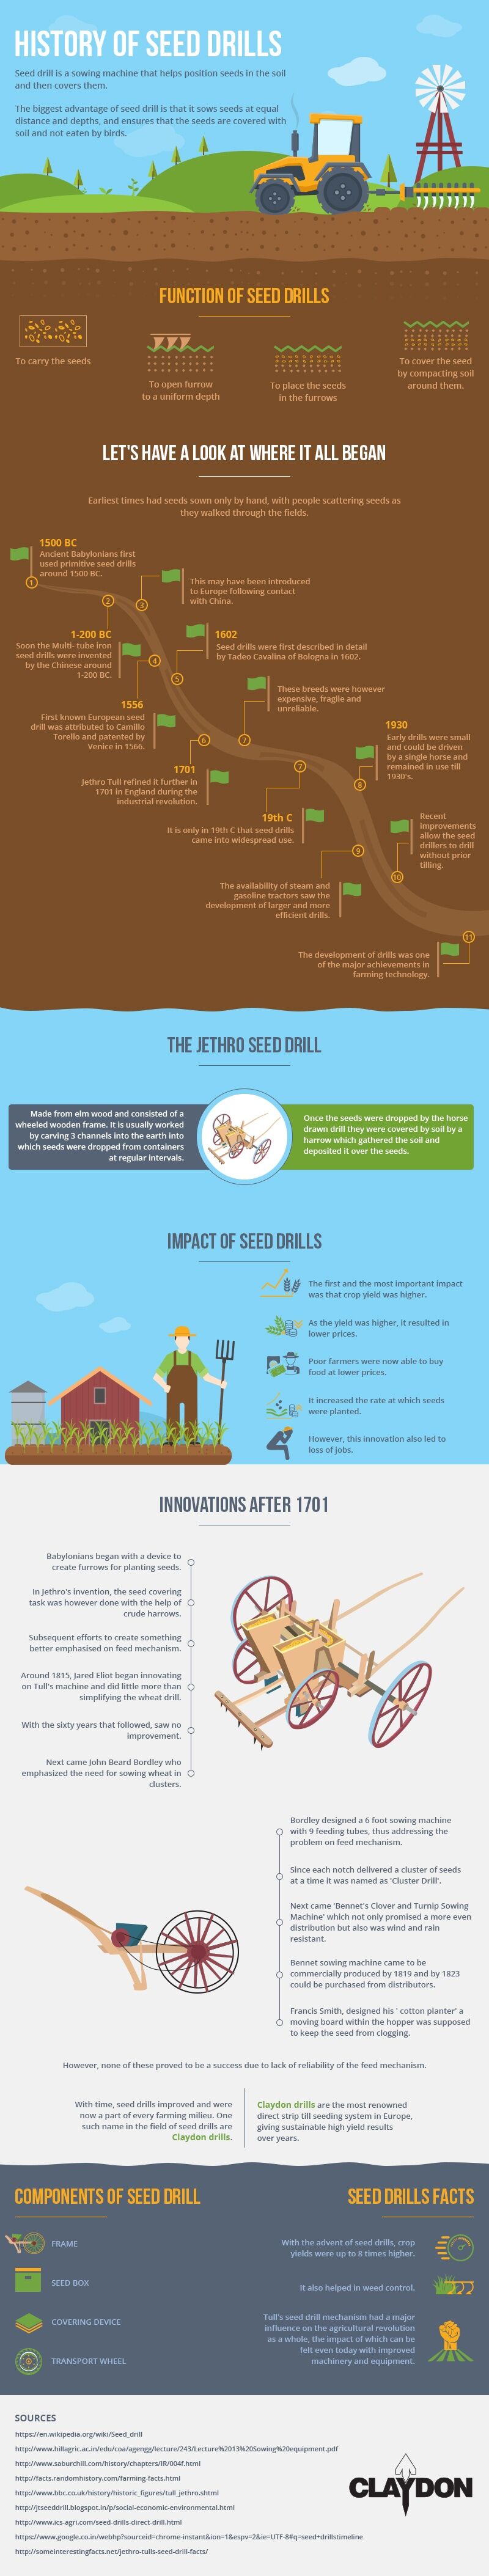 History of Seed Drills